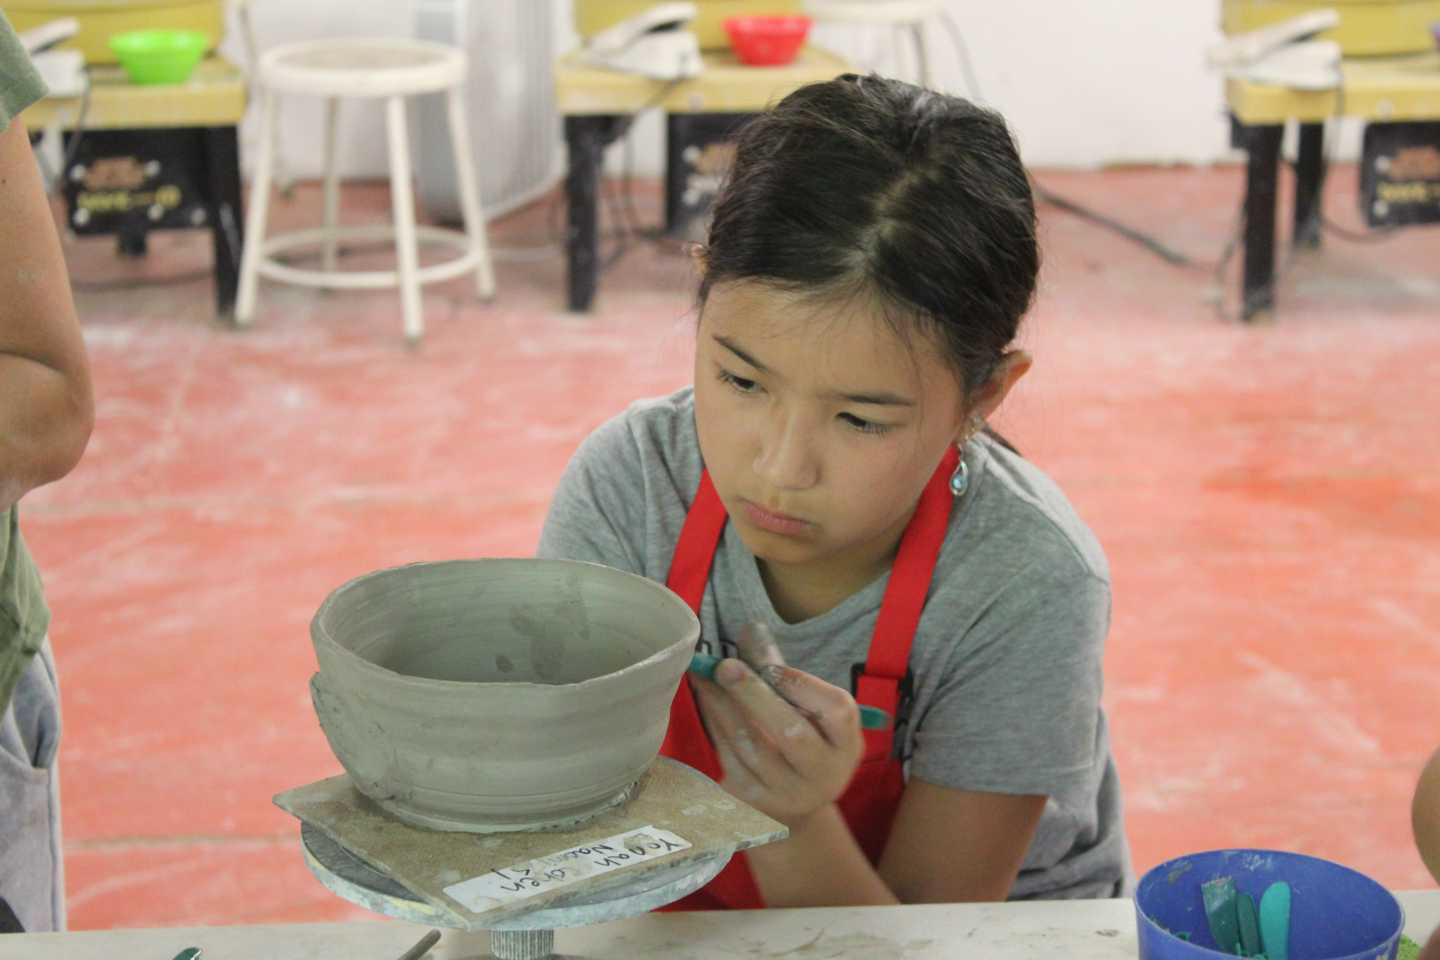 A camper working on pottery.